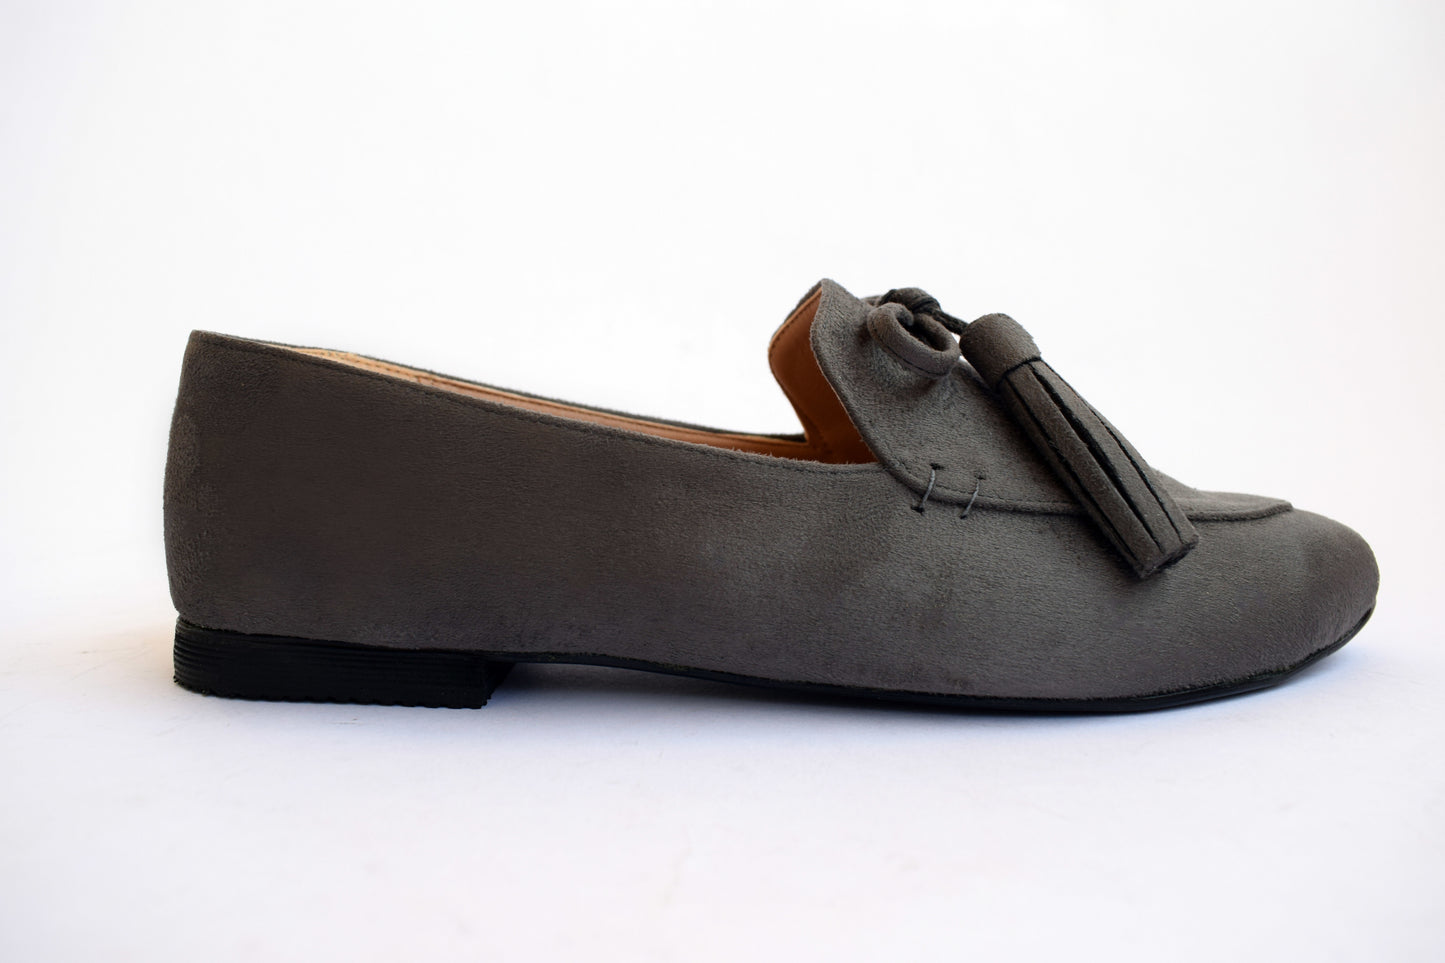 Grey Pointed Bow Tasseled Loafers